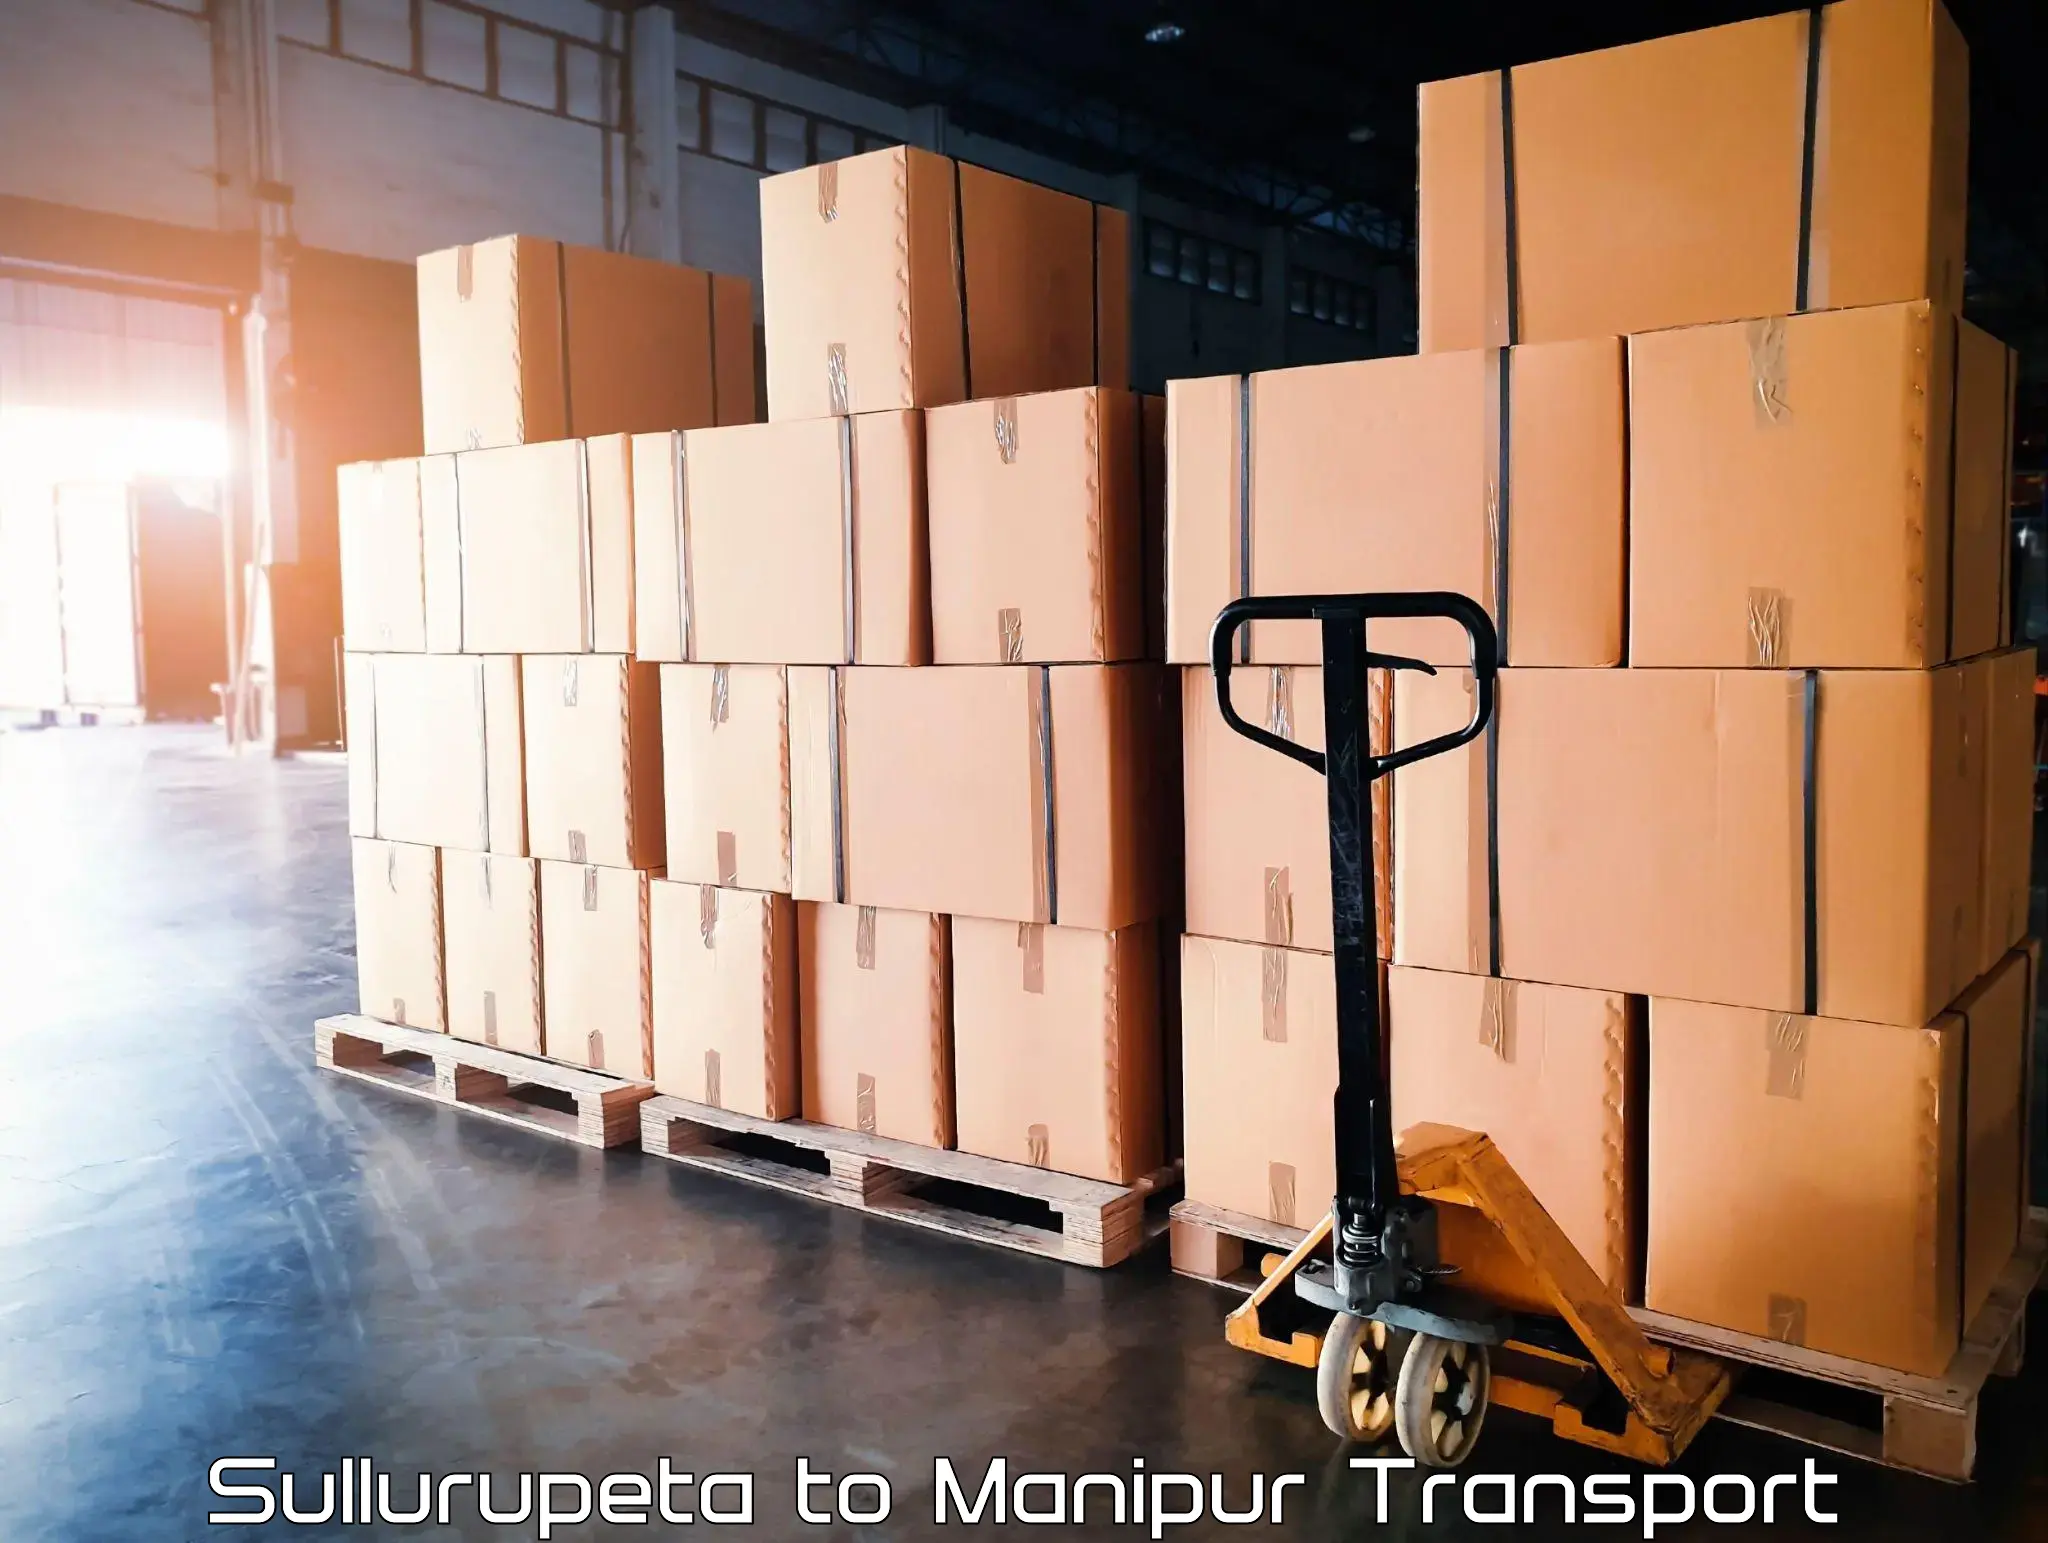 Transport bike from one state to another Sullurupeta to Manipur